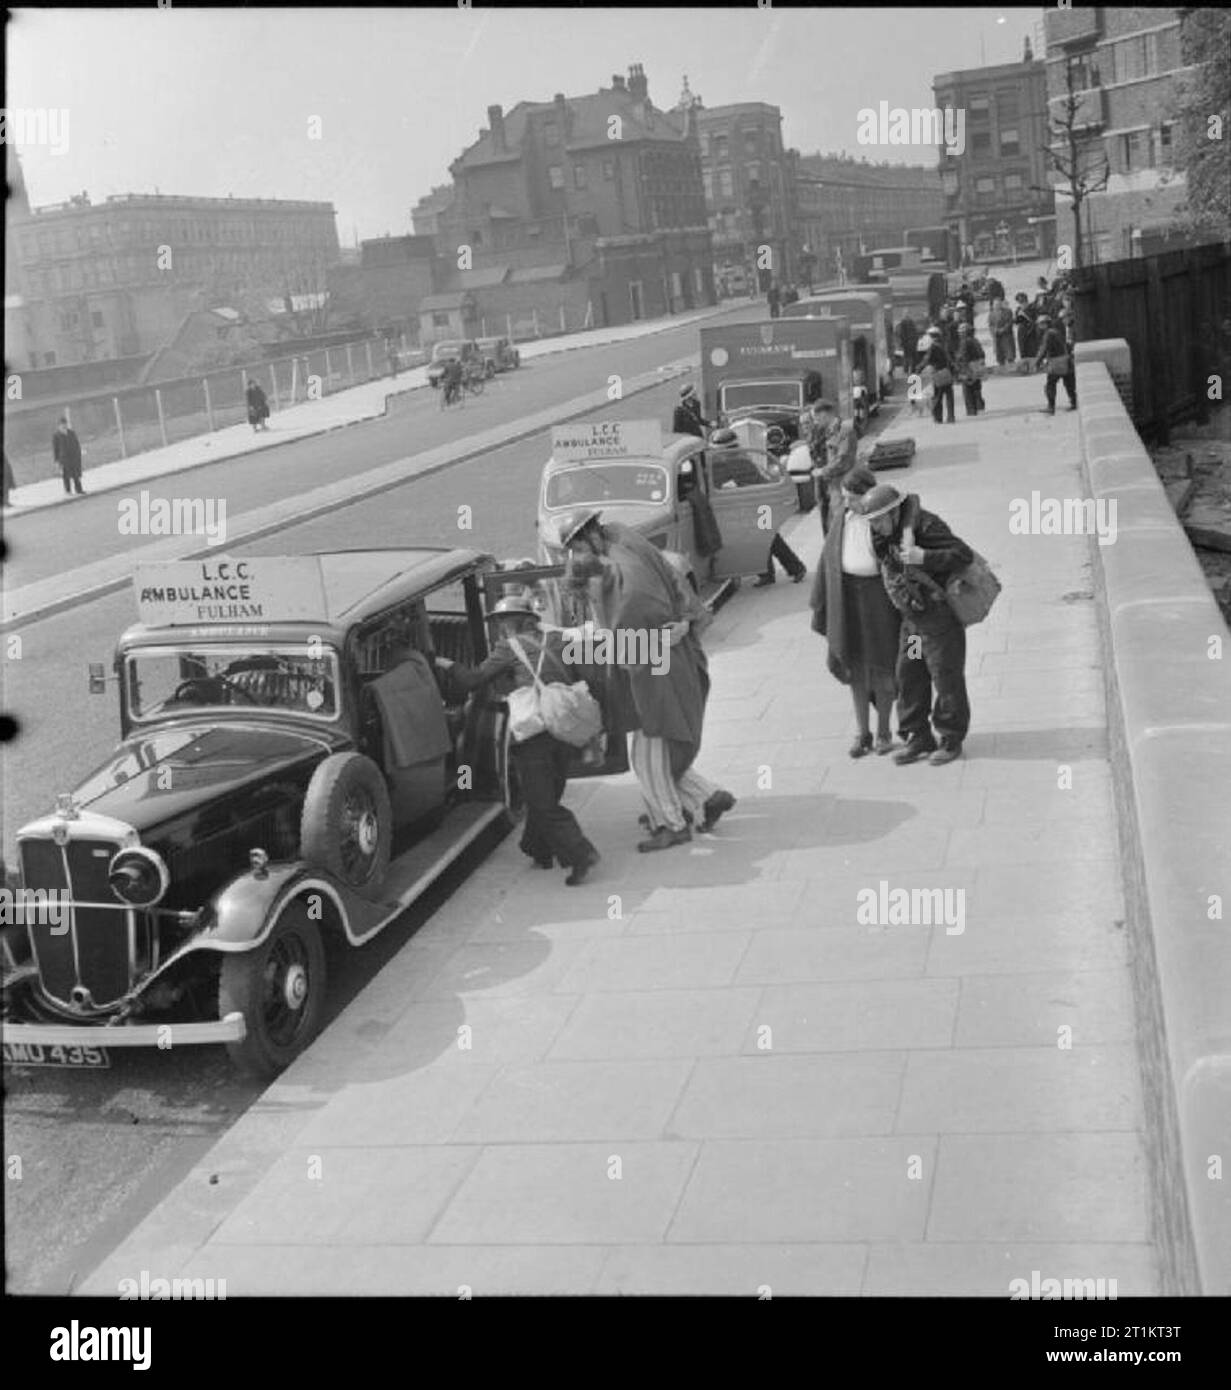 The Reconstruction of 'an Incident'- Civil Defence Training in Fulham, London, 1942 Walking wounded cases are led to waiting ambulance cars by members of the 'light rescue' teams, as behind them, stretcher cases are carried to ambulances. This photograph was taken on West Cromwell Road/Conan Street, looking West towards North End Road, which crosses Conan Street at right angles. Conan Street becomes Talgarth Road at this junction. West Kensington Court is visible on the right. Stock Photo